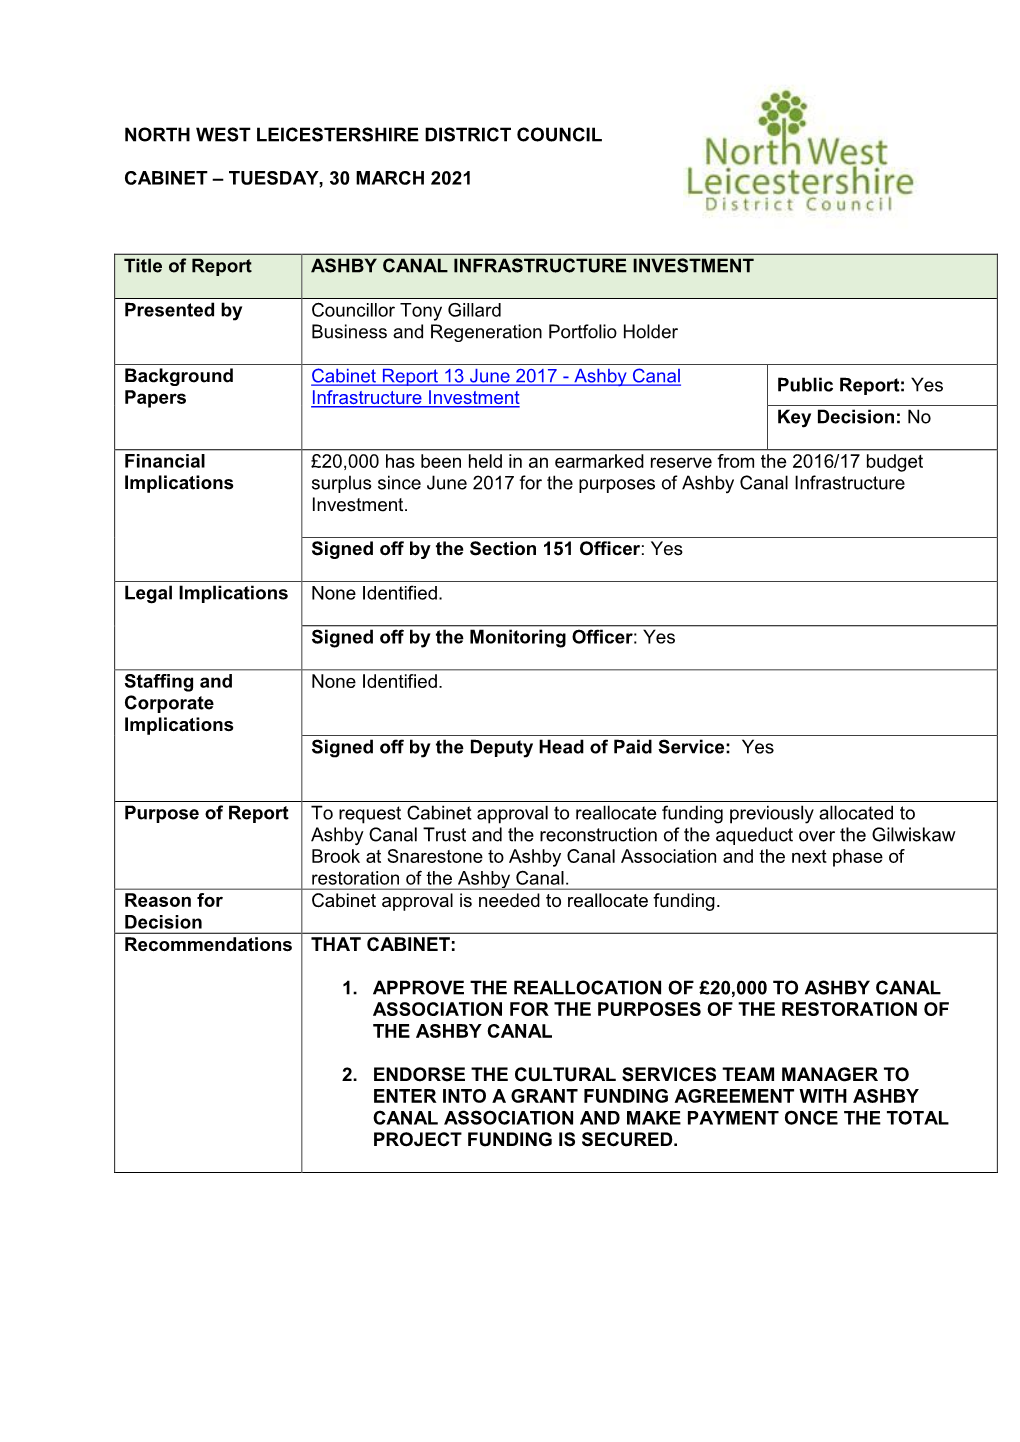 Ashby Canal Infrastructure Investment PDF 1 MB